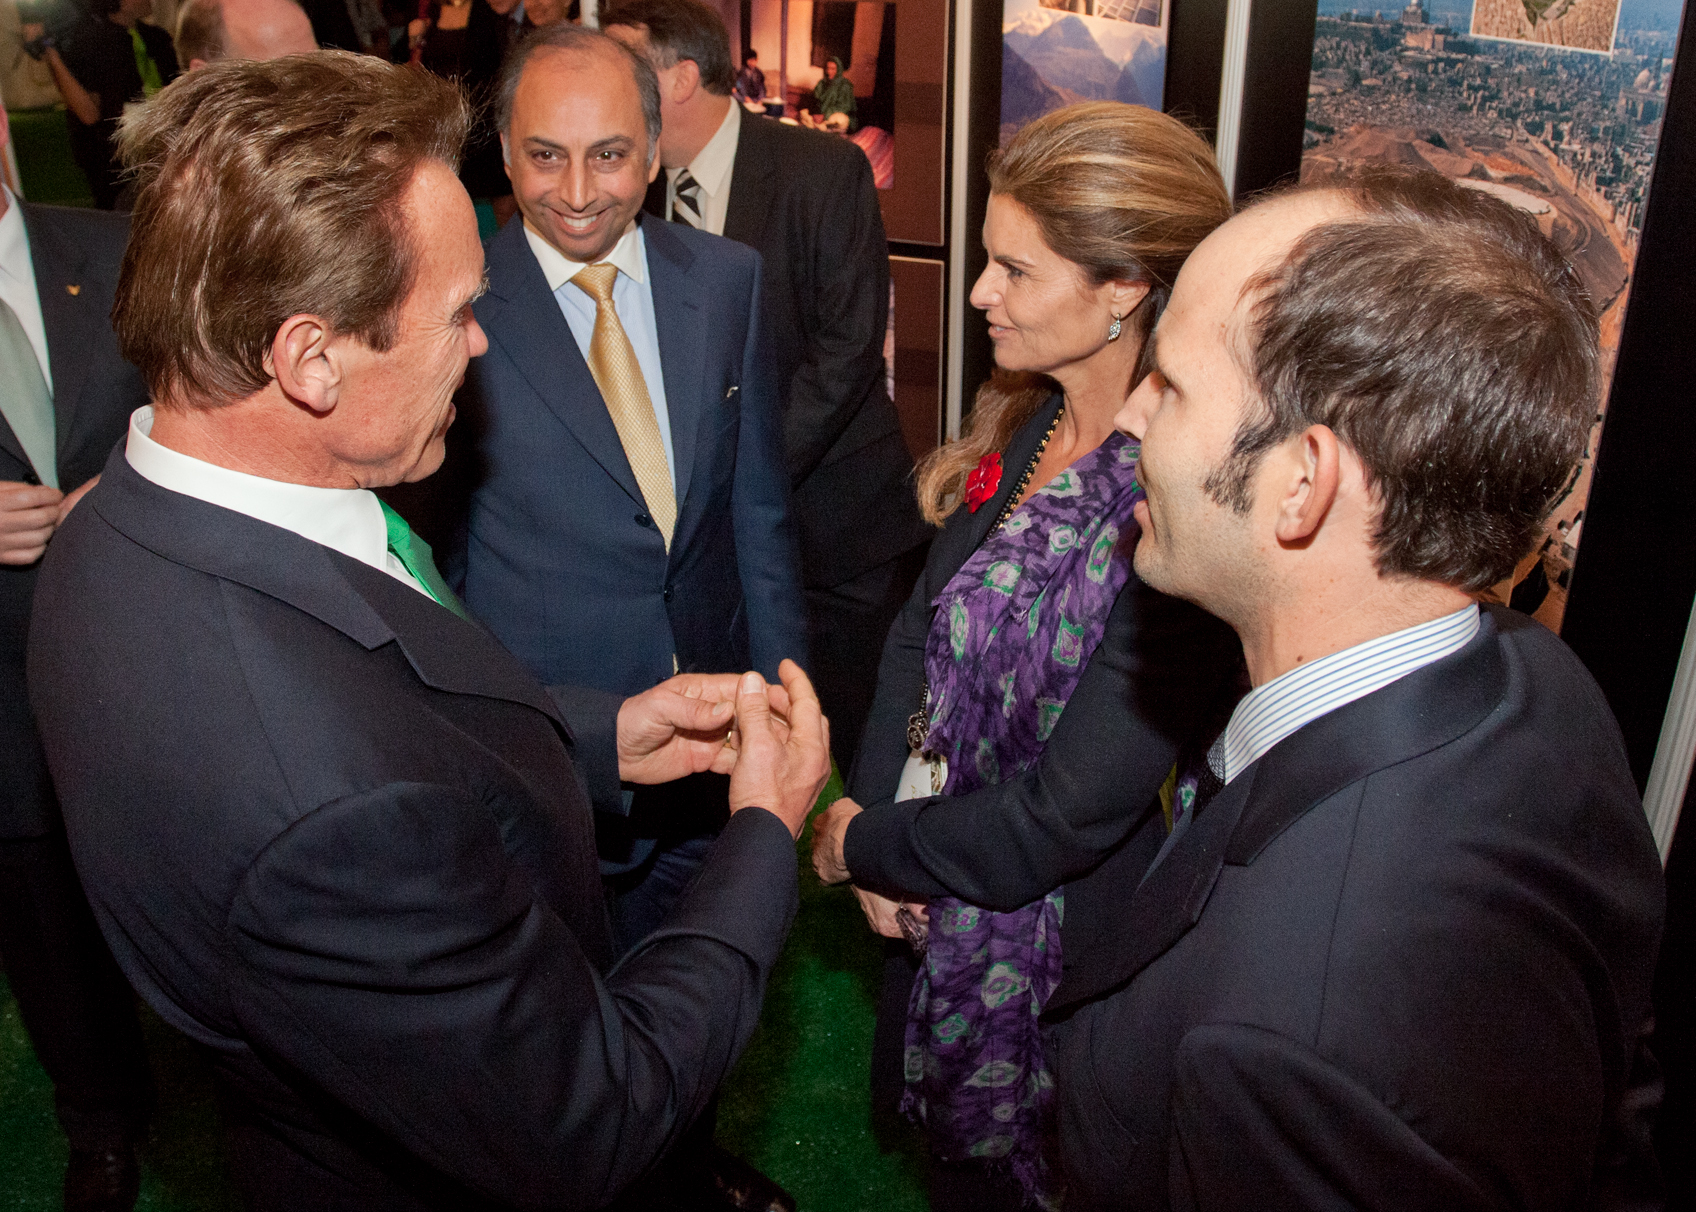 Prince Hussain, California Governor Arnold Schwarzenegger, First Lady of California Maria Shriver, and Ismaili Council for the USA President Mahmoud Eboo in conversation at the AKDN booth in the global pavilion of the Governor’s Global Climate Summit. Photo: Farhez Rayani